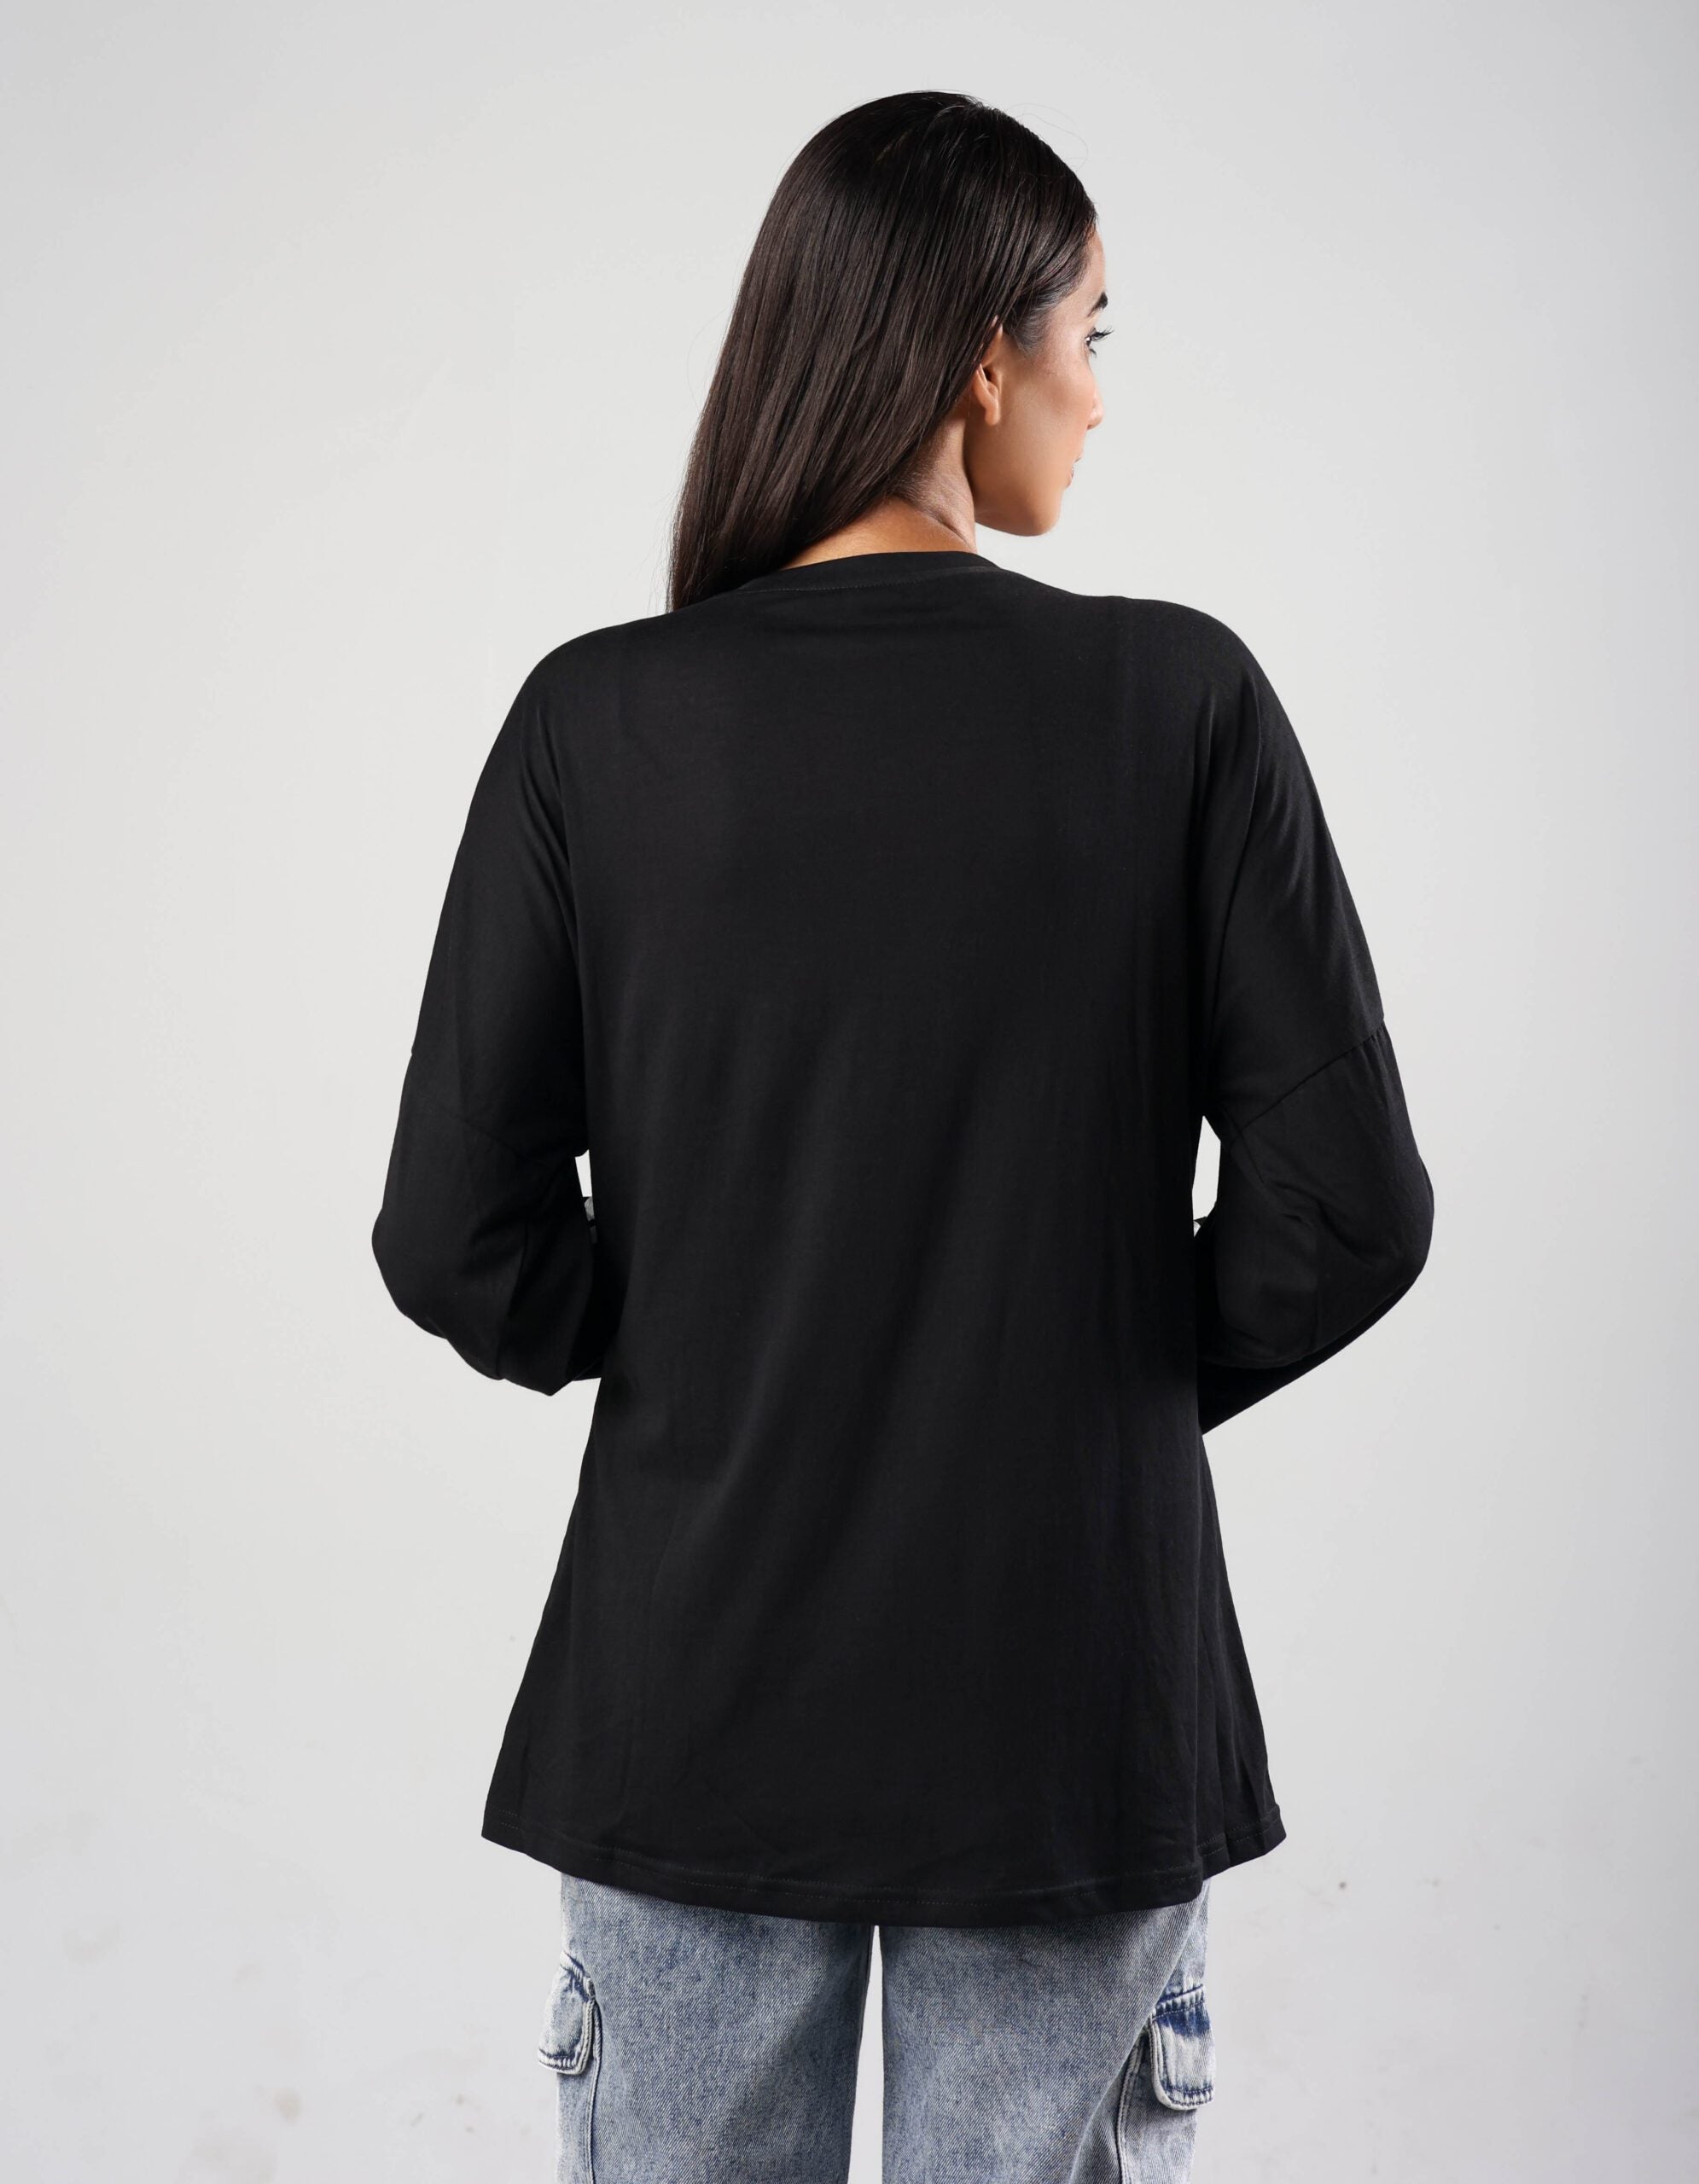 Numeric Print Neck Fullsleeve Tshirt Top - Elevate Your Style